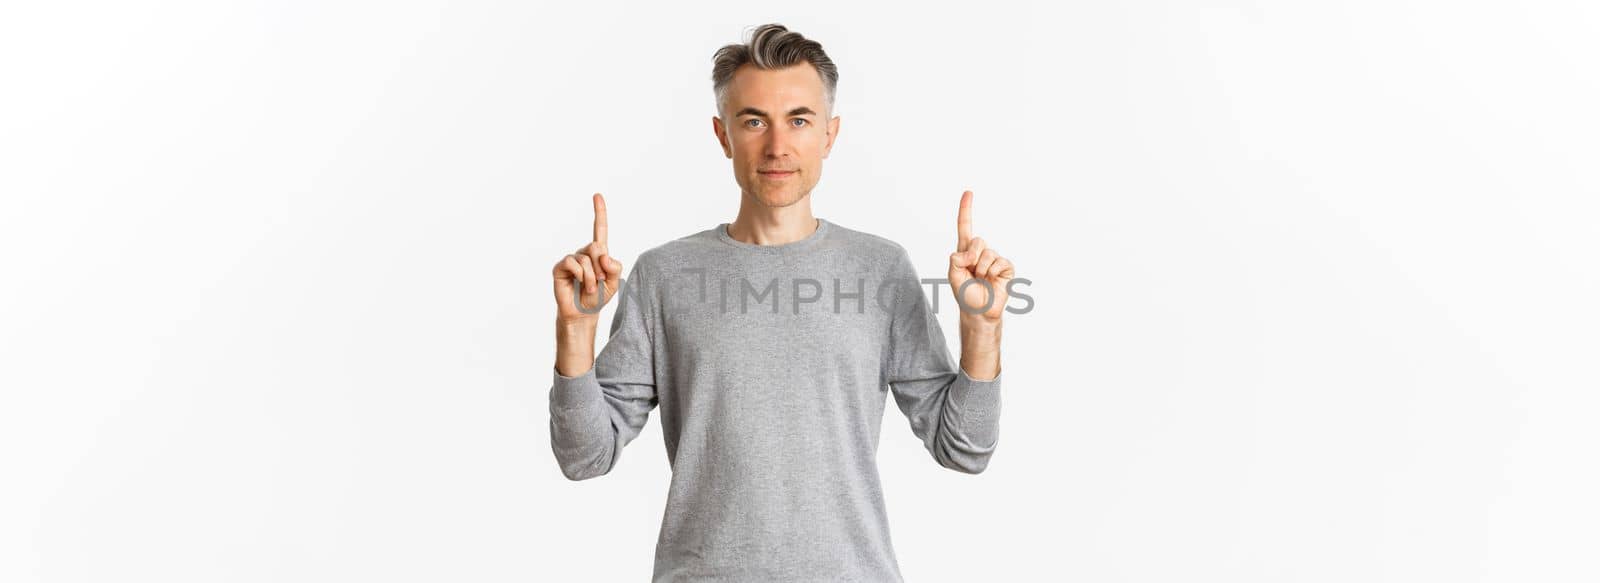 Portrait of handsome middle-aged man in grey sweater, showing promo, pointing fingers up and looking serious, standing over white background.